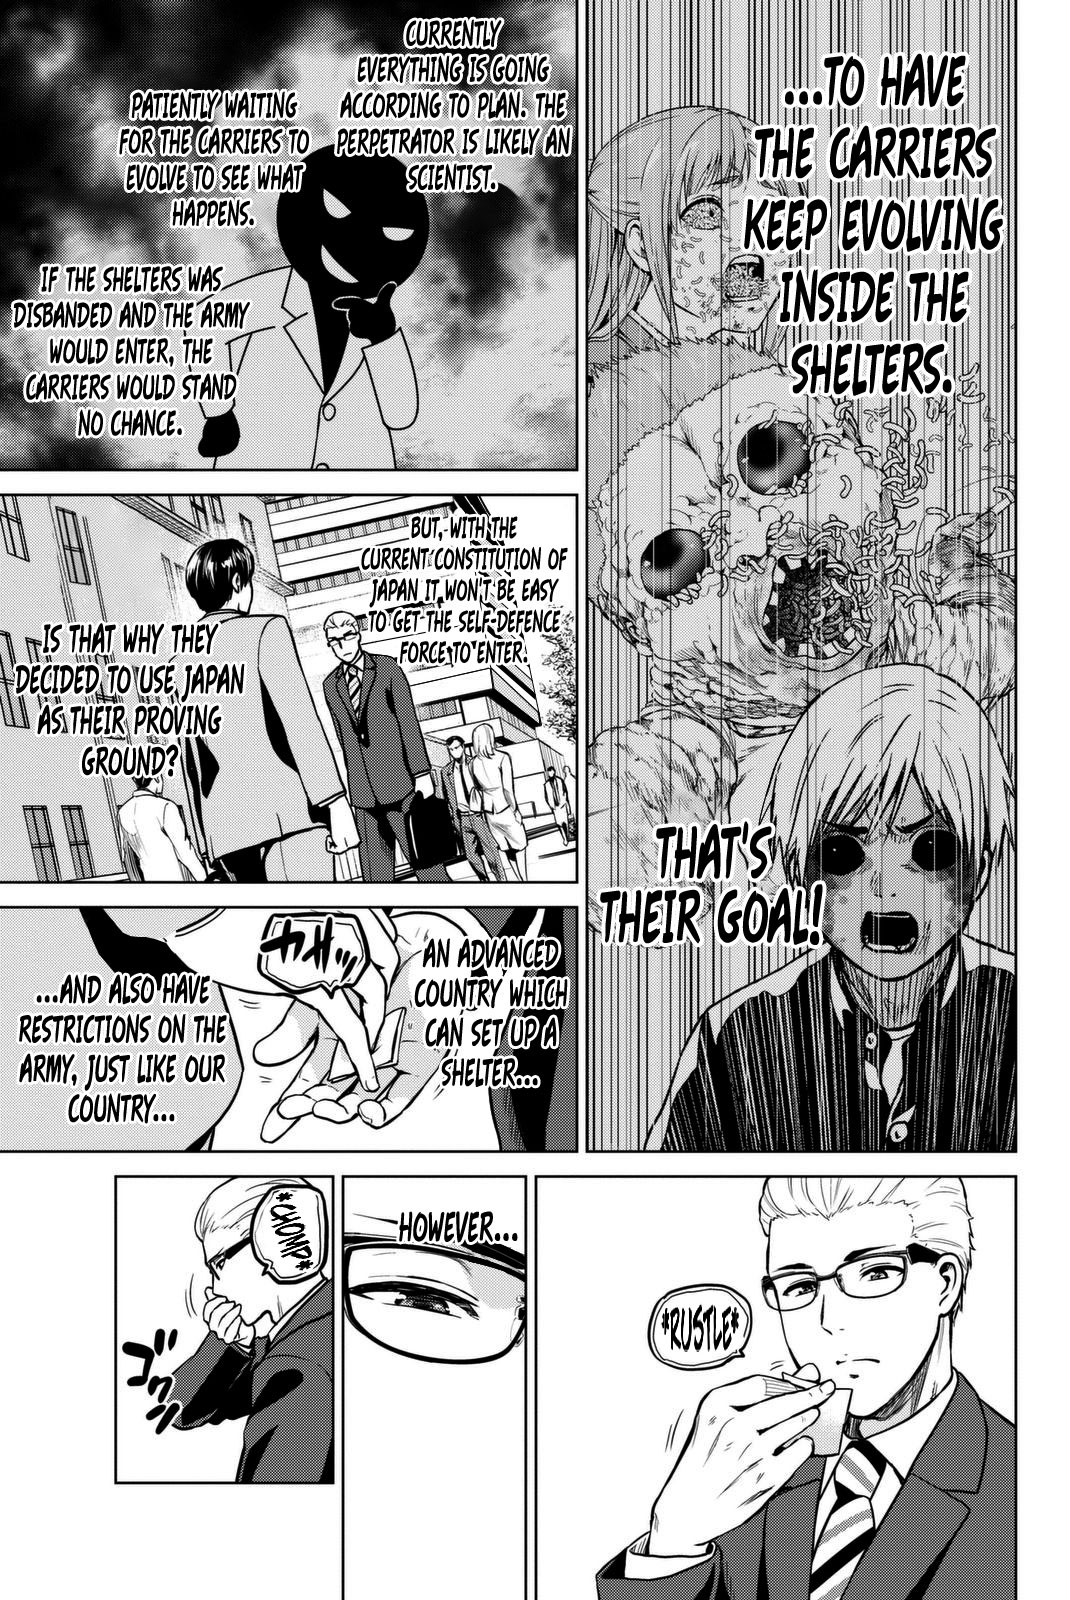 INFECTION Vol. 7 Ch. 52 A story of love and war